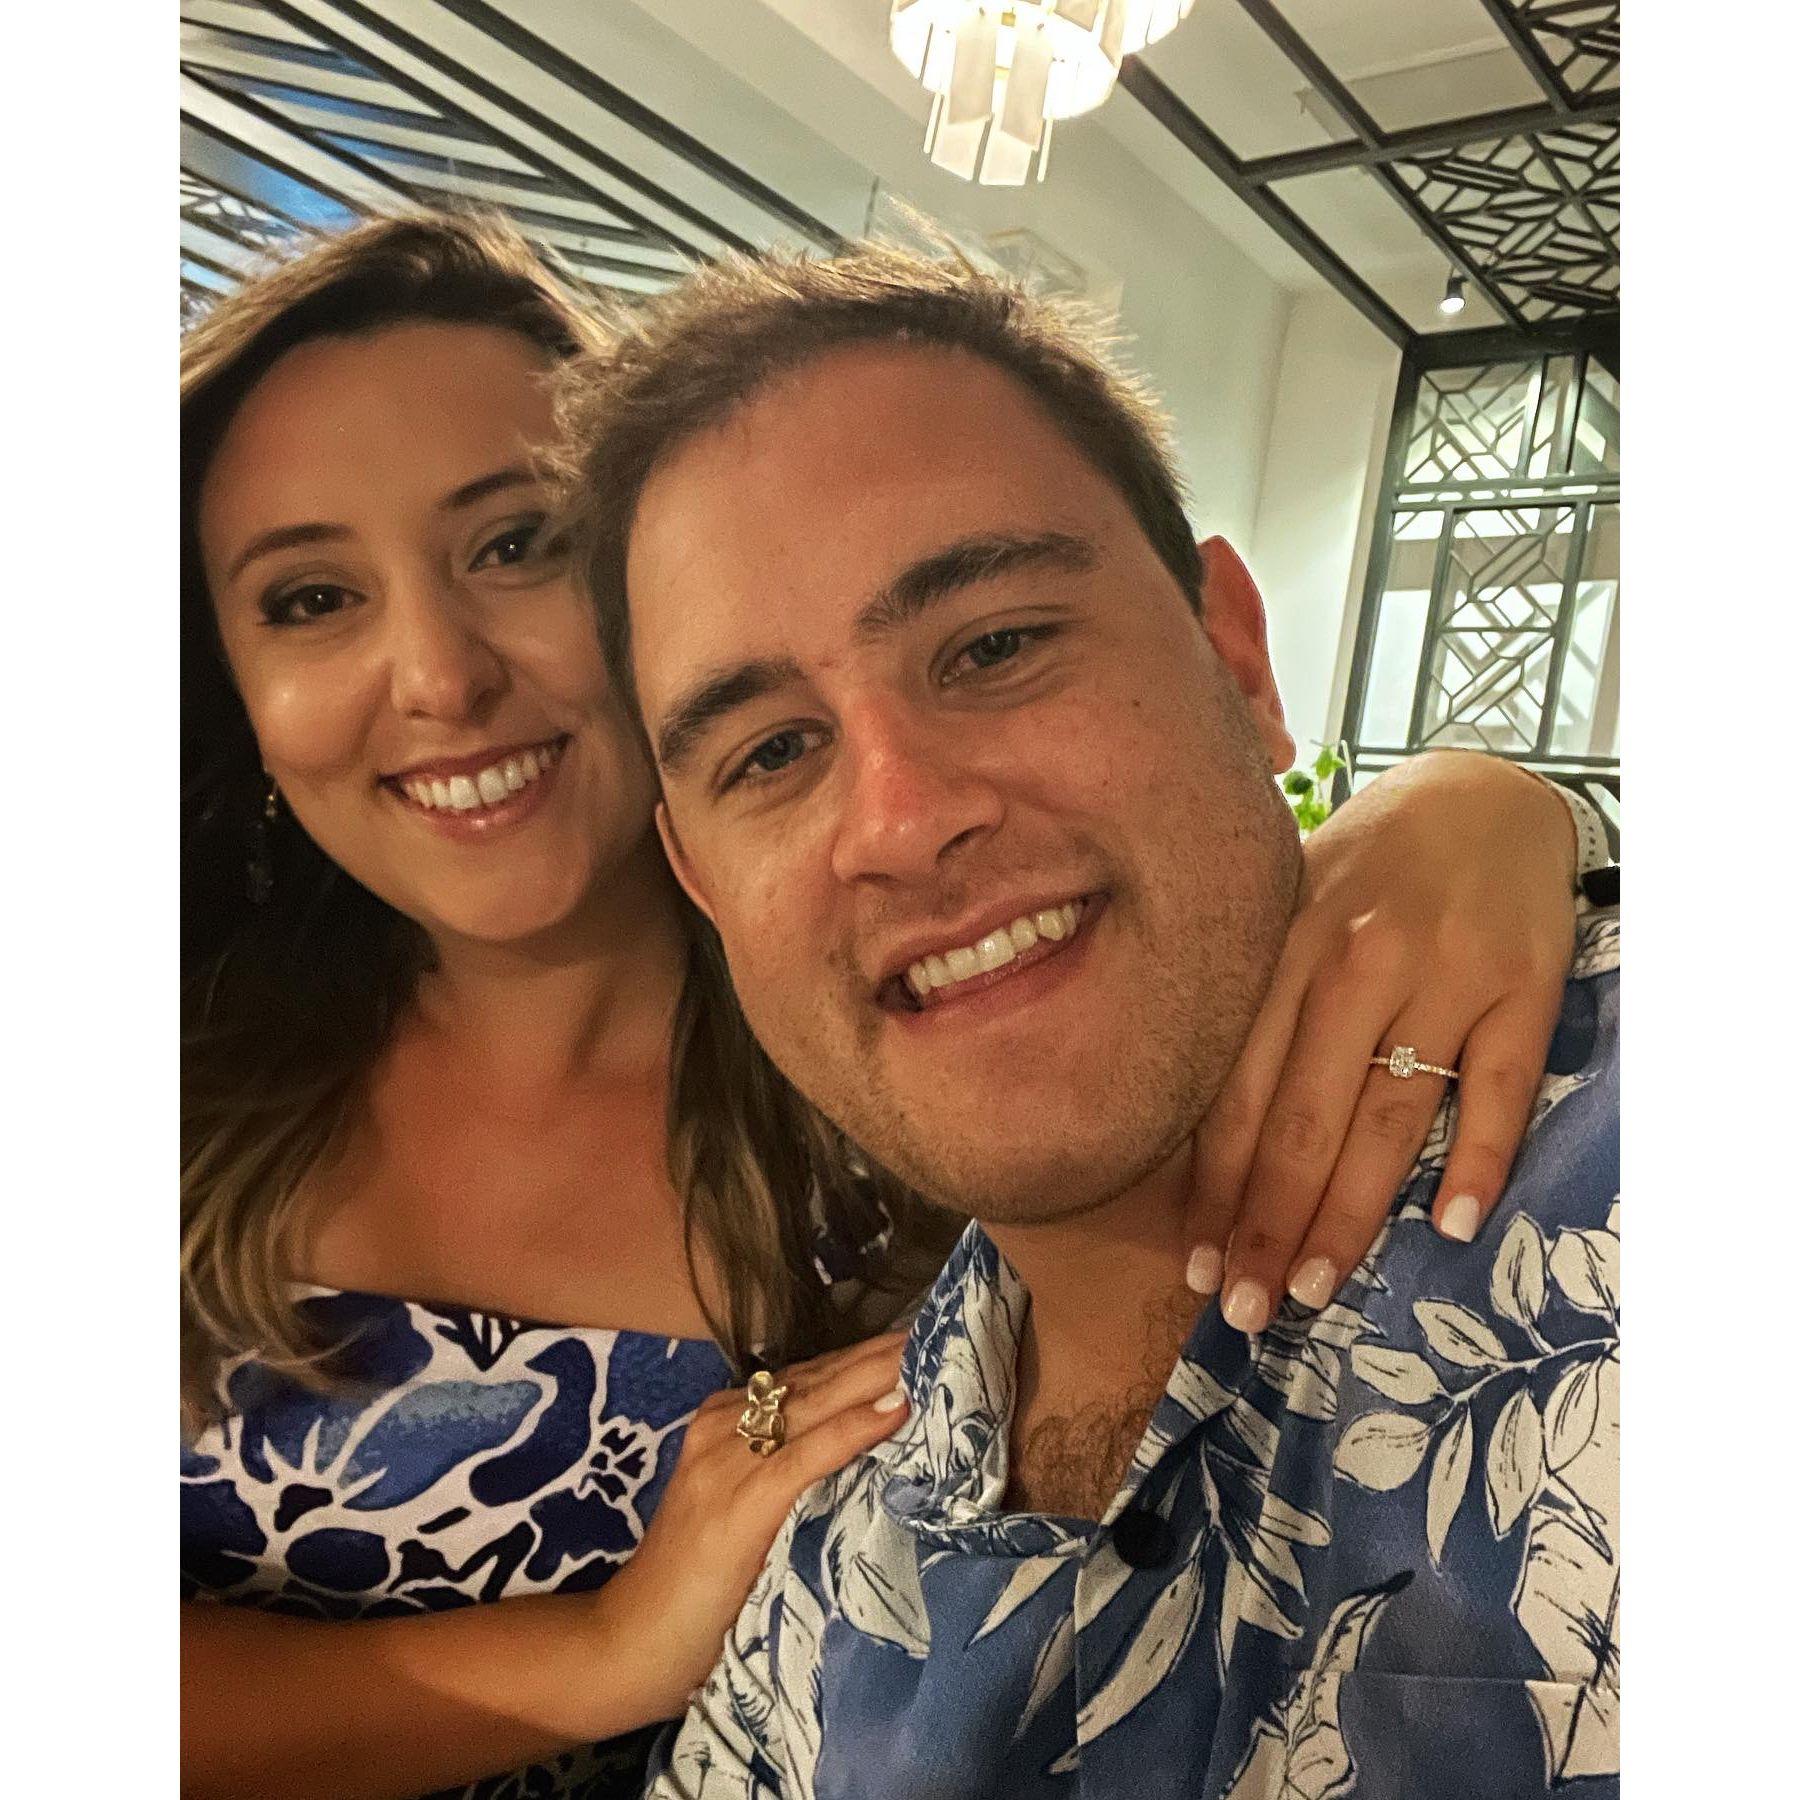 A couple hours after Jordan said 'YES' to Fred's proposal, they enjoy a romantic dinner at their resorts Mediterranean restaurant. The two are on Cloud 9!! Happiest day of their lives!